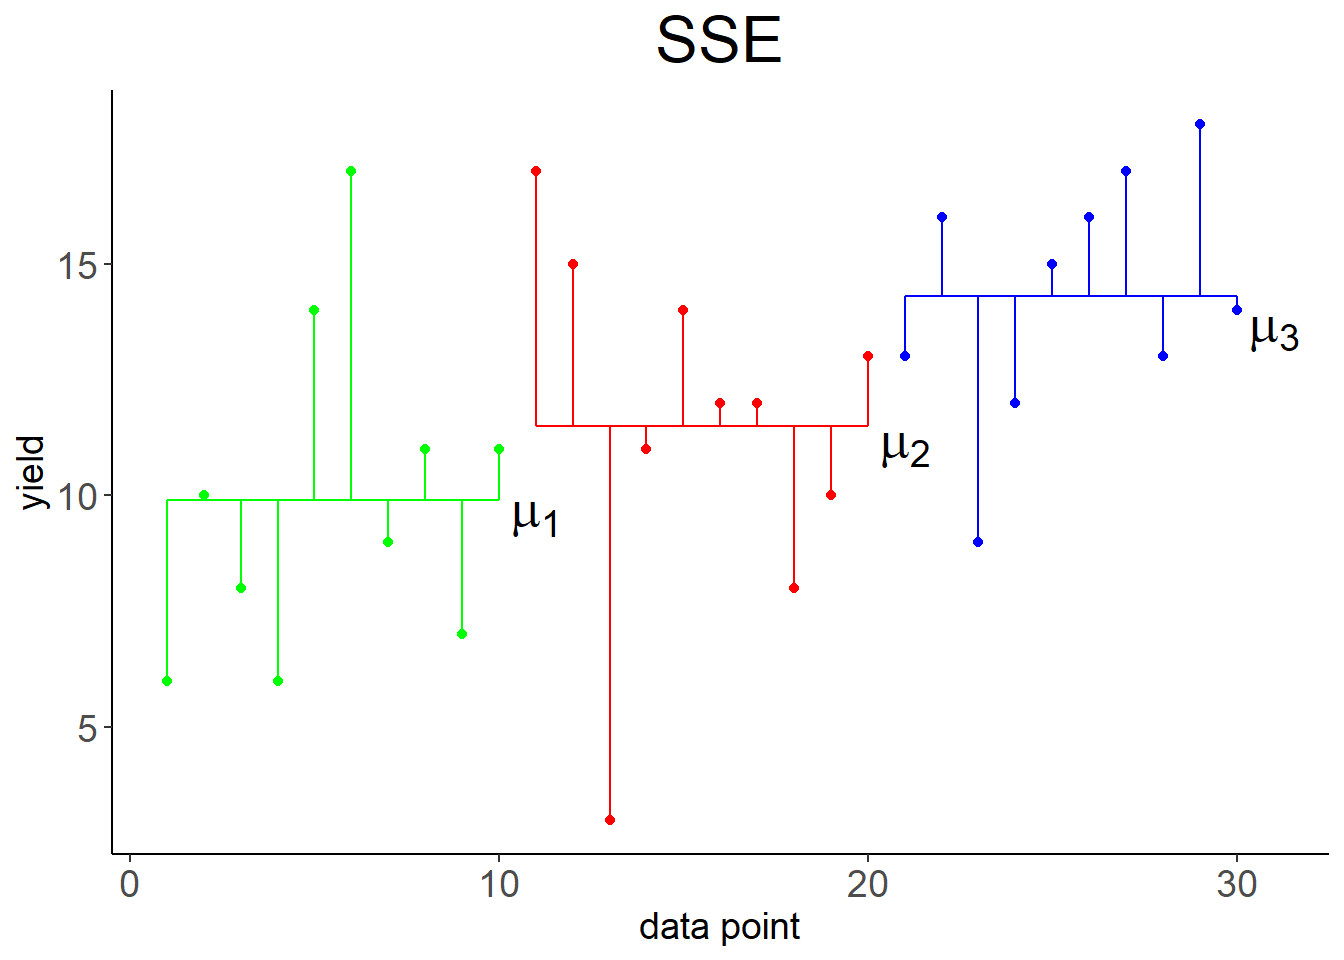 Left: Variation of data points around overall mean $\mu$, summarised by $SSY$. Right: Variation of data points around individual means $\mu_1, \mu_2, \mu_3$, summarised by $SSE$.